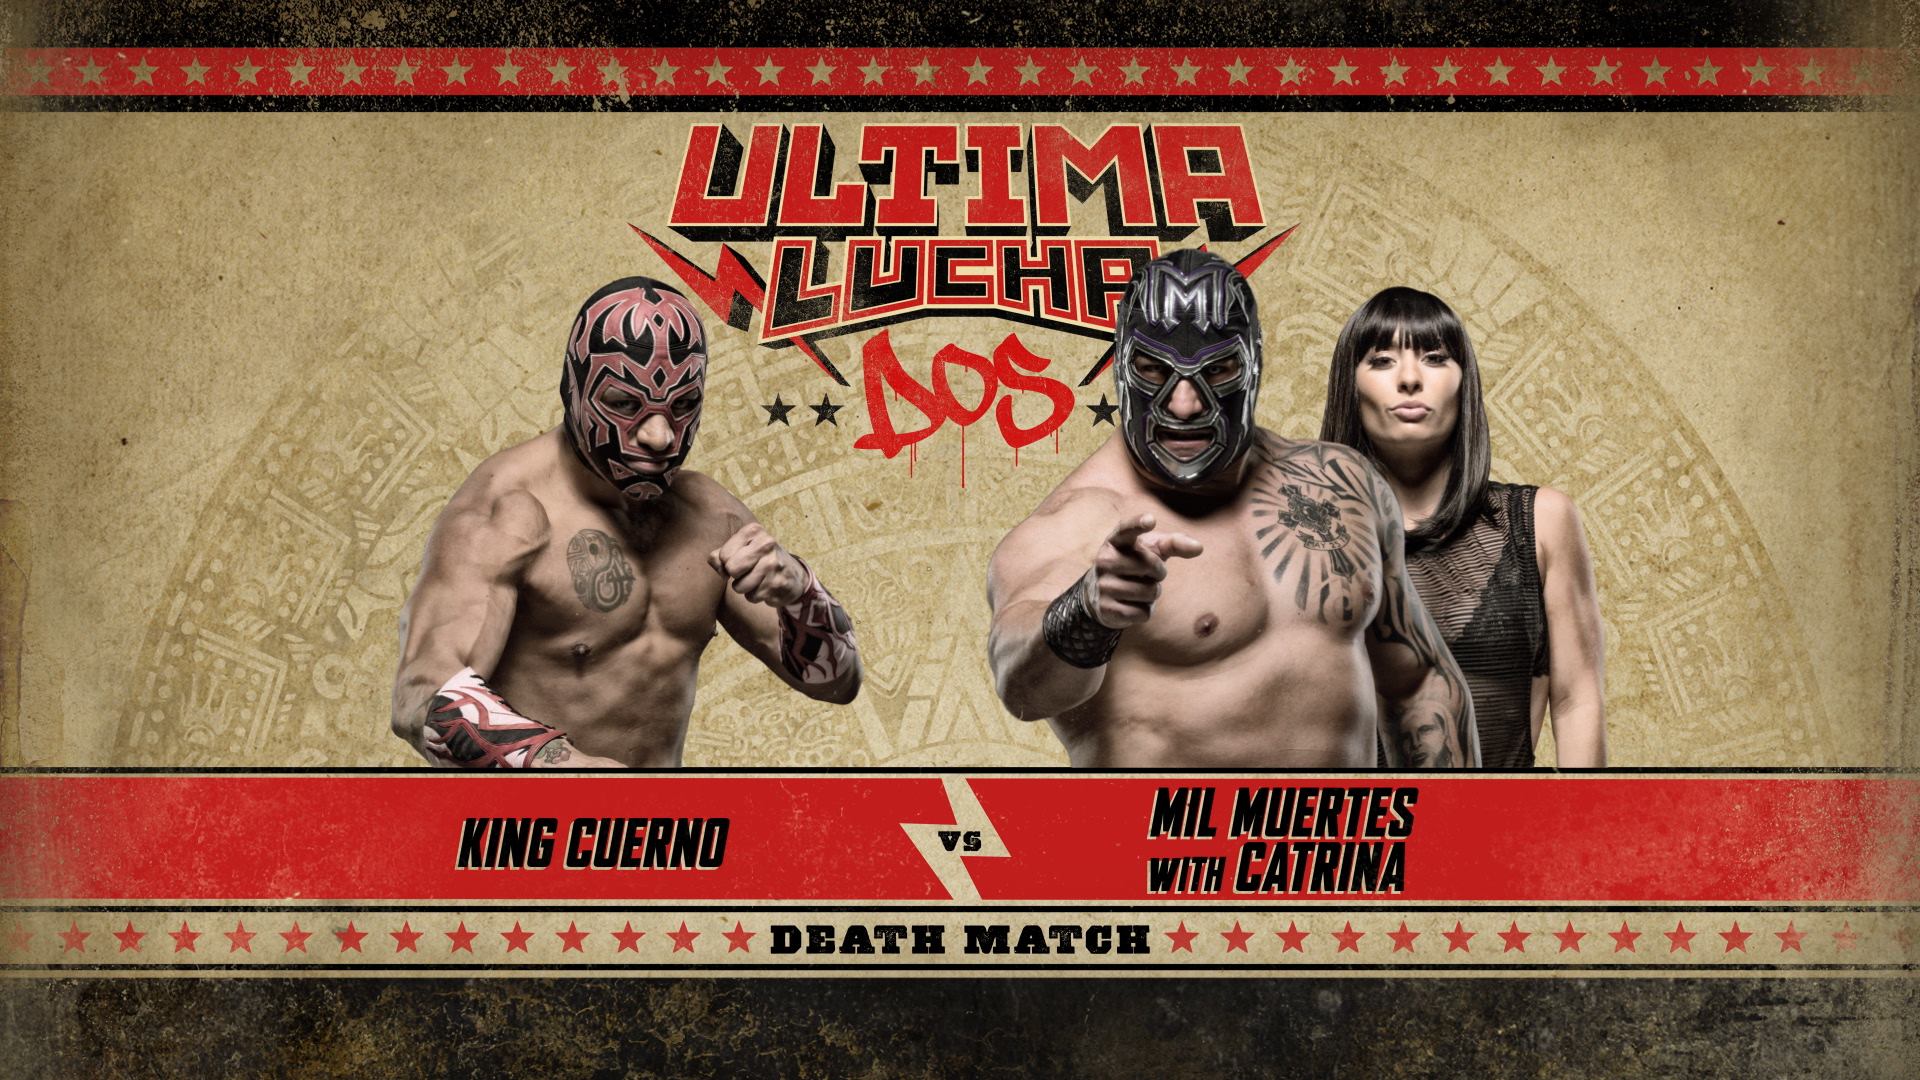 Lucha Underground Results 13 16 (Ultima Lucha Dos Continues, 7 Way Match For Gift Of The Gods Title, Muertes Cuerno Death Match) News And Results, RAW And Smackdown Results, Impact News, ROH News